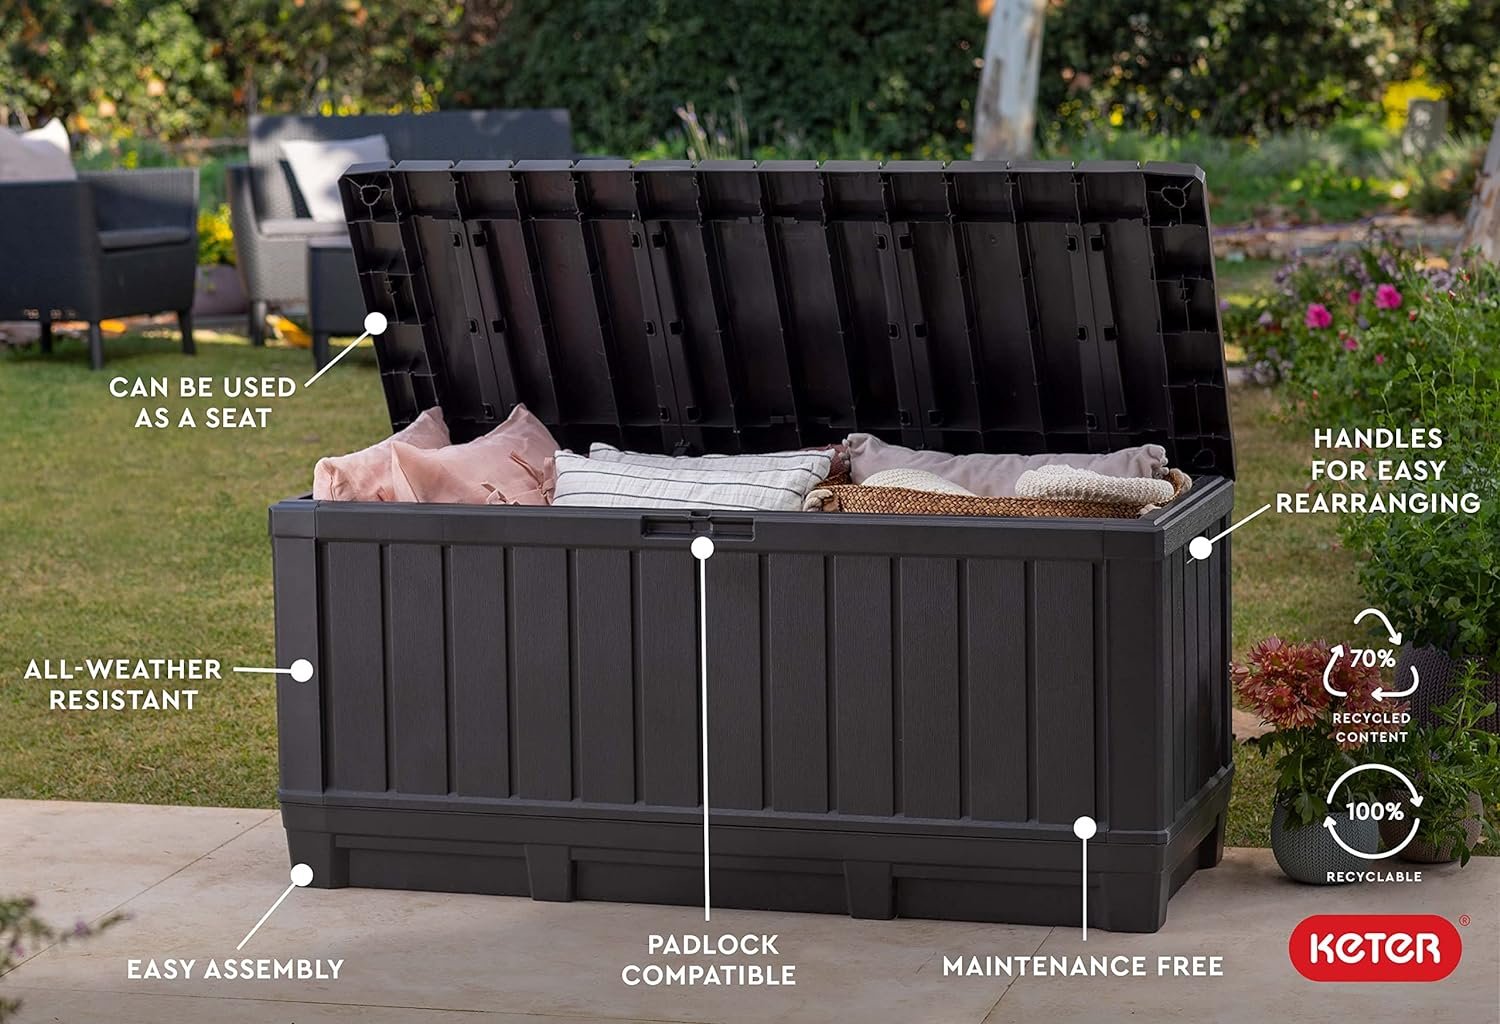 Keter Kentwood 92 Gallon Resin Deck Box-Organization and Storage for Patio Furniture Outdoor Cushions, Throw Pillows, Garden Tools and Pool Floats, Dark Grey